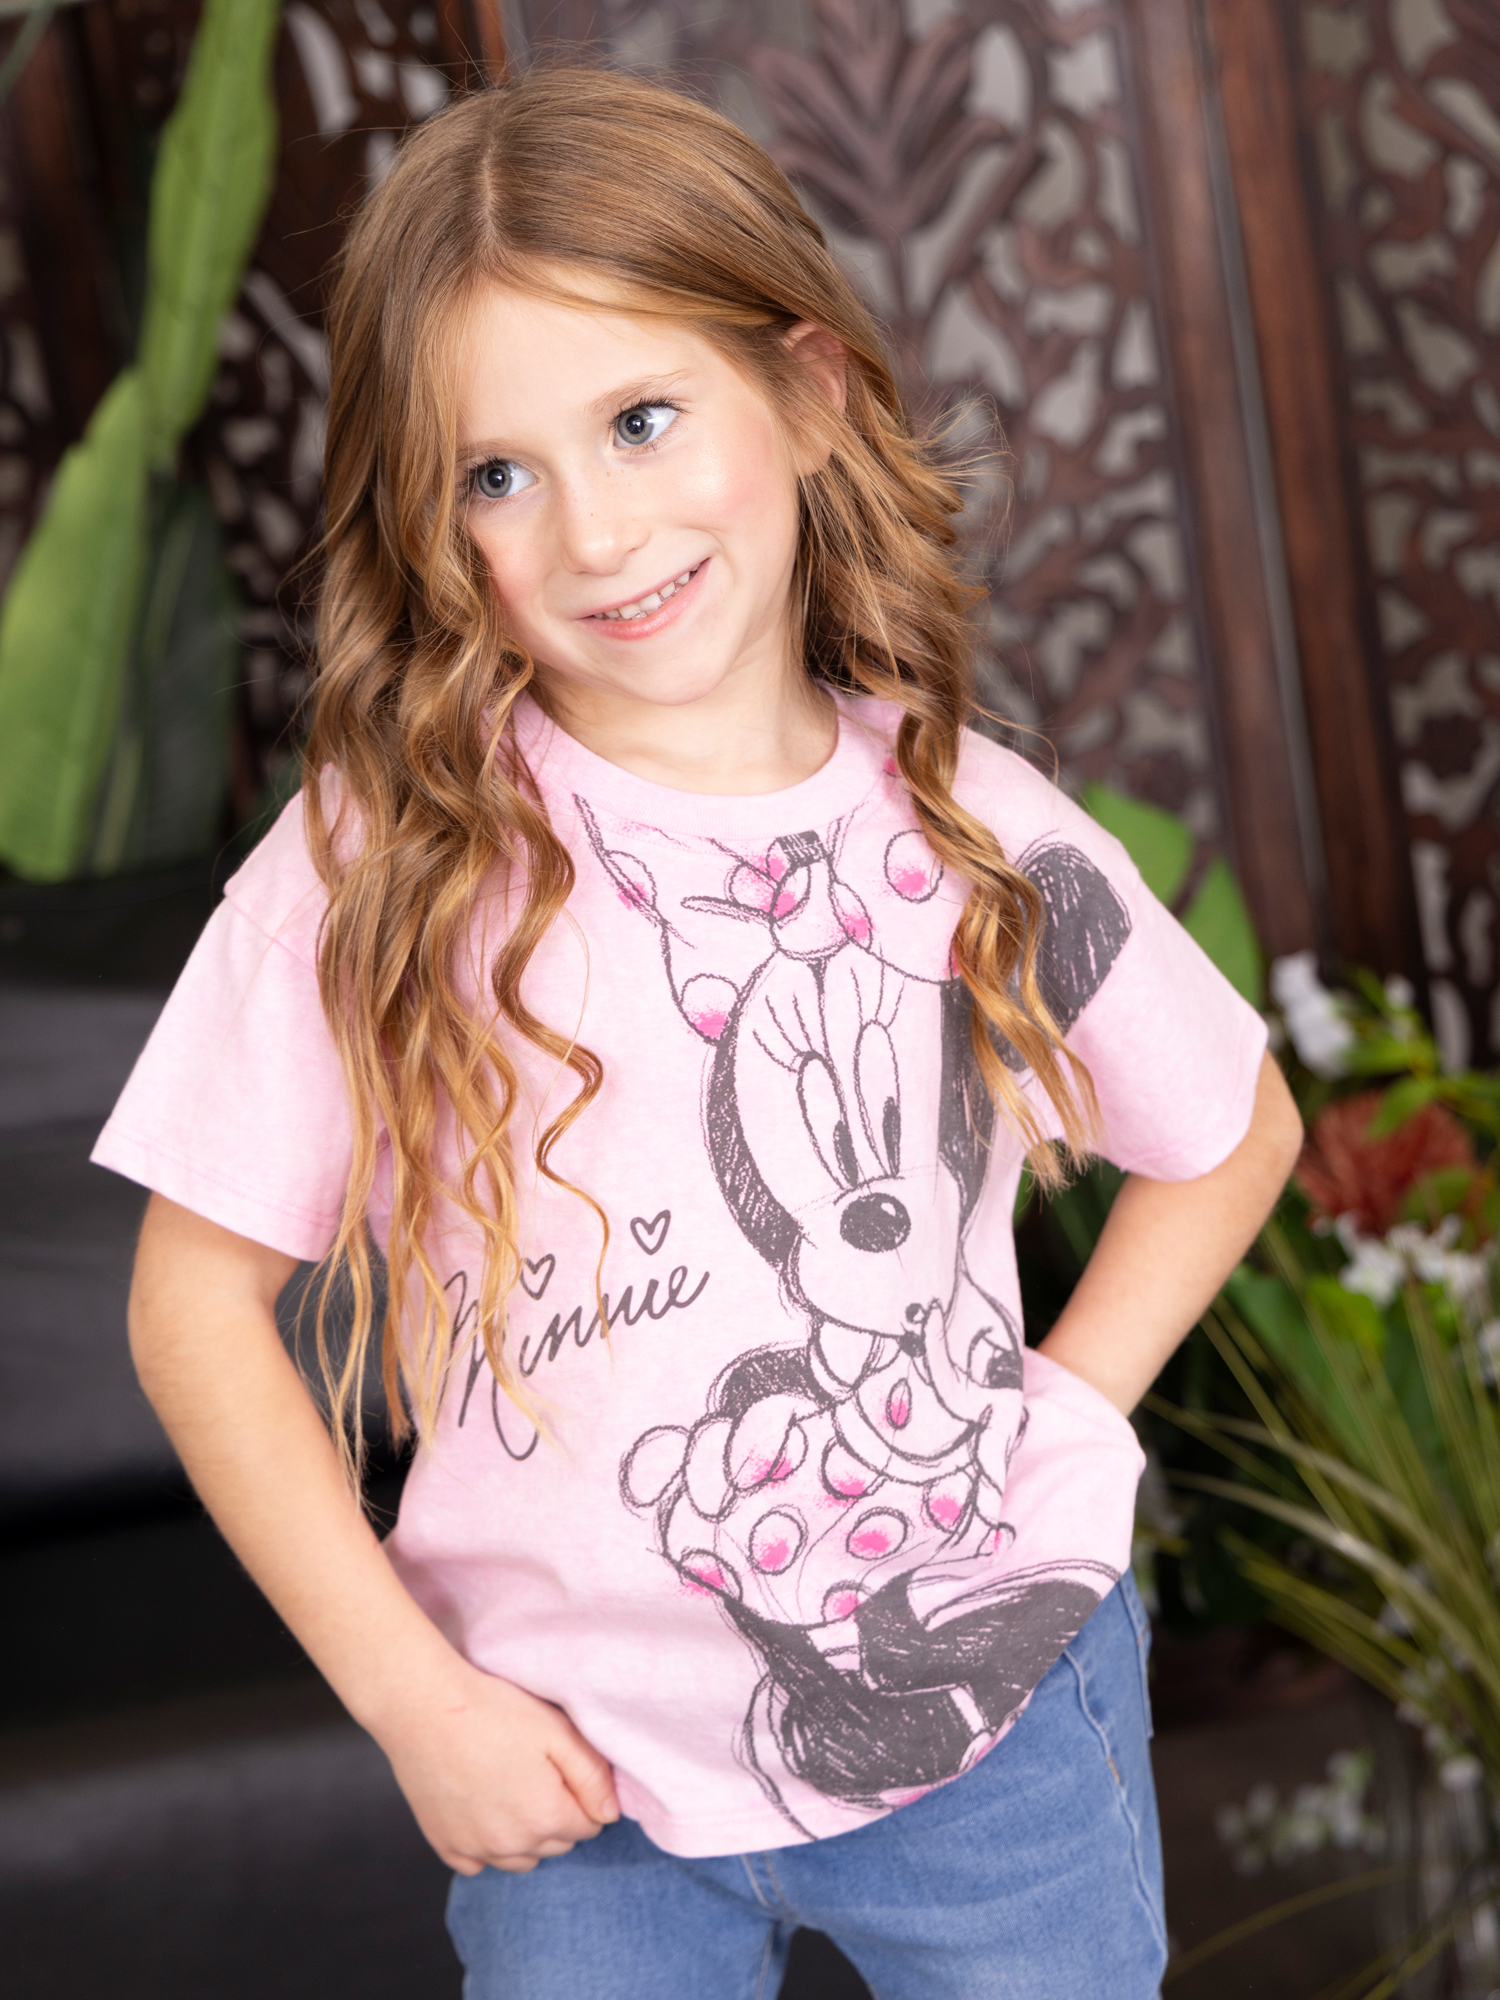 Minnie Mouse Toddler Girls Short Sleeve Crewneck T-Shirt, Sizes 12M-5T - image 2 of 7